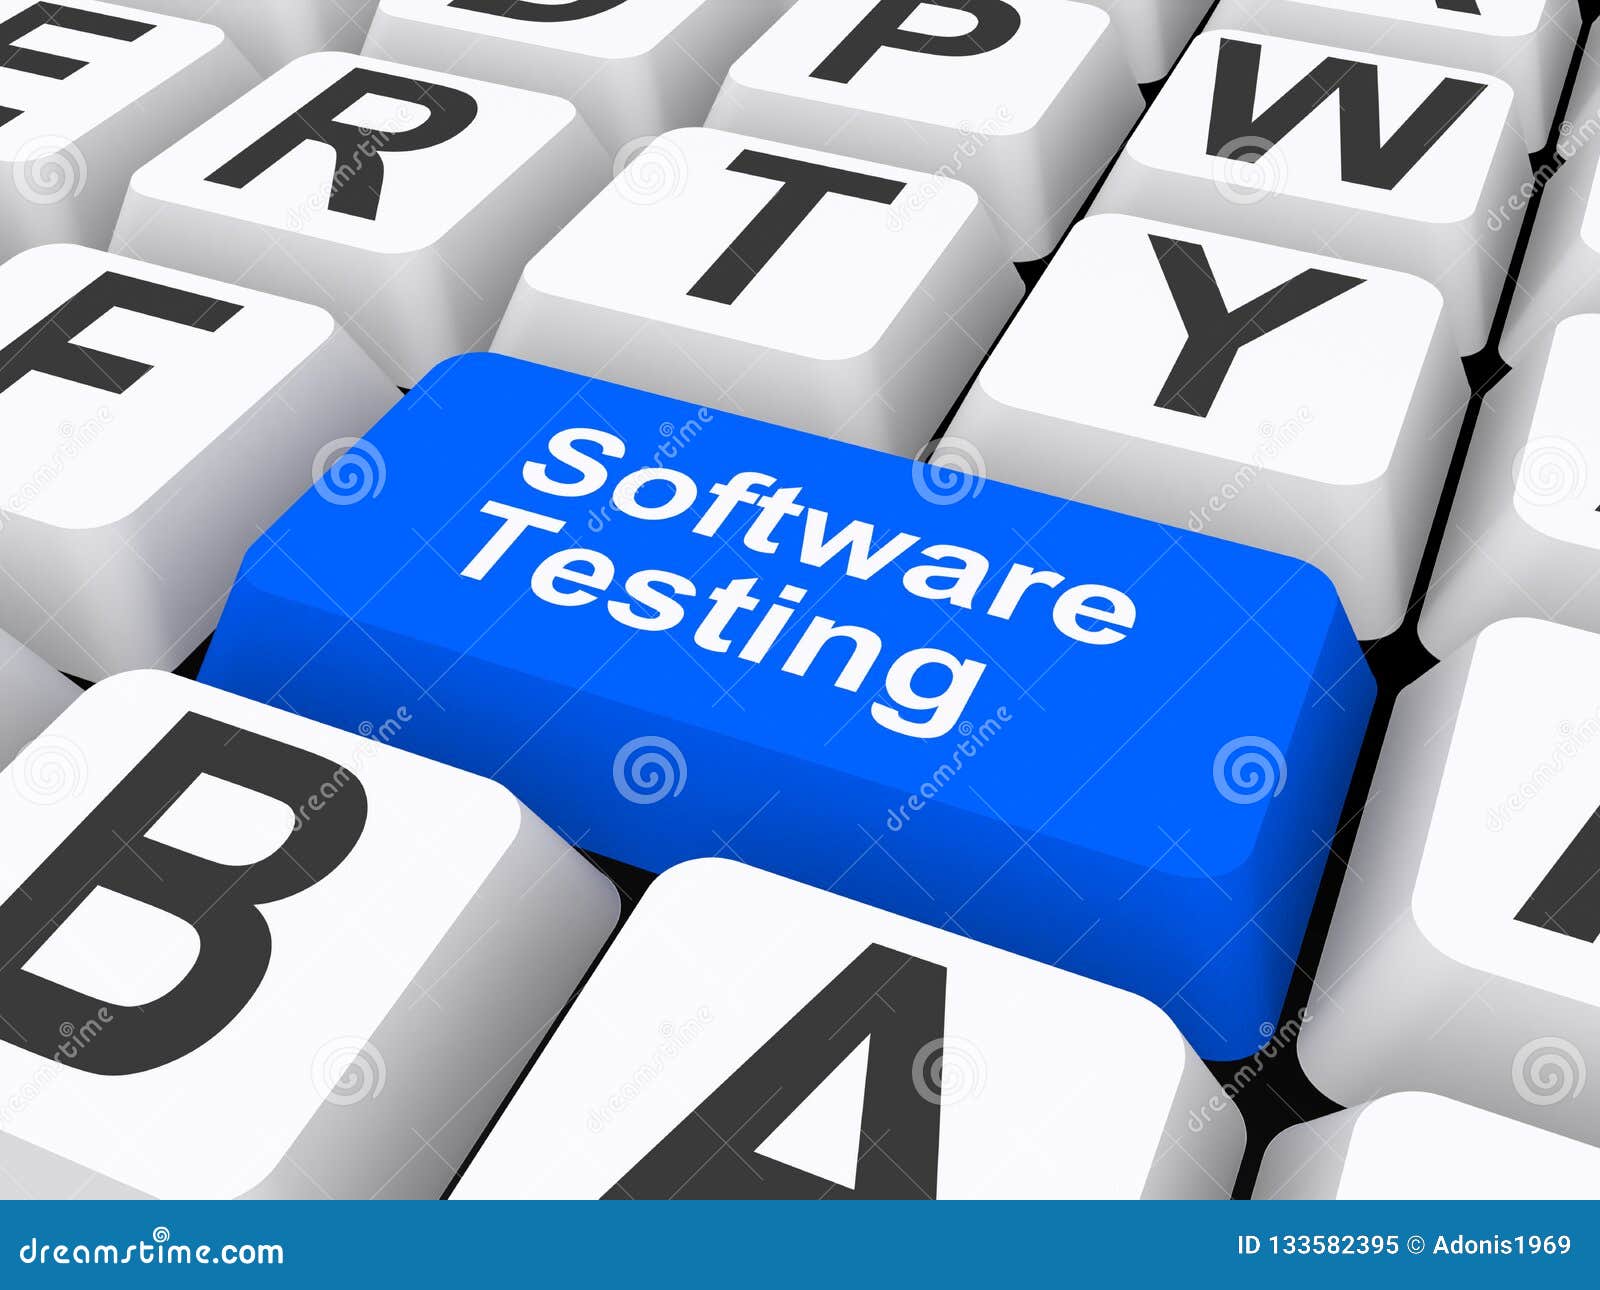 what is test management tool in software testing